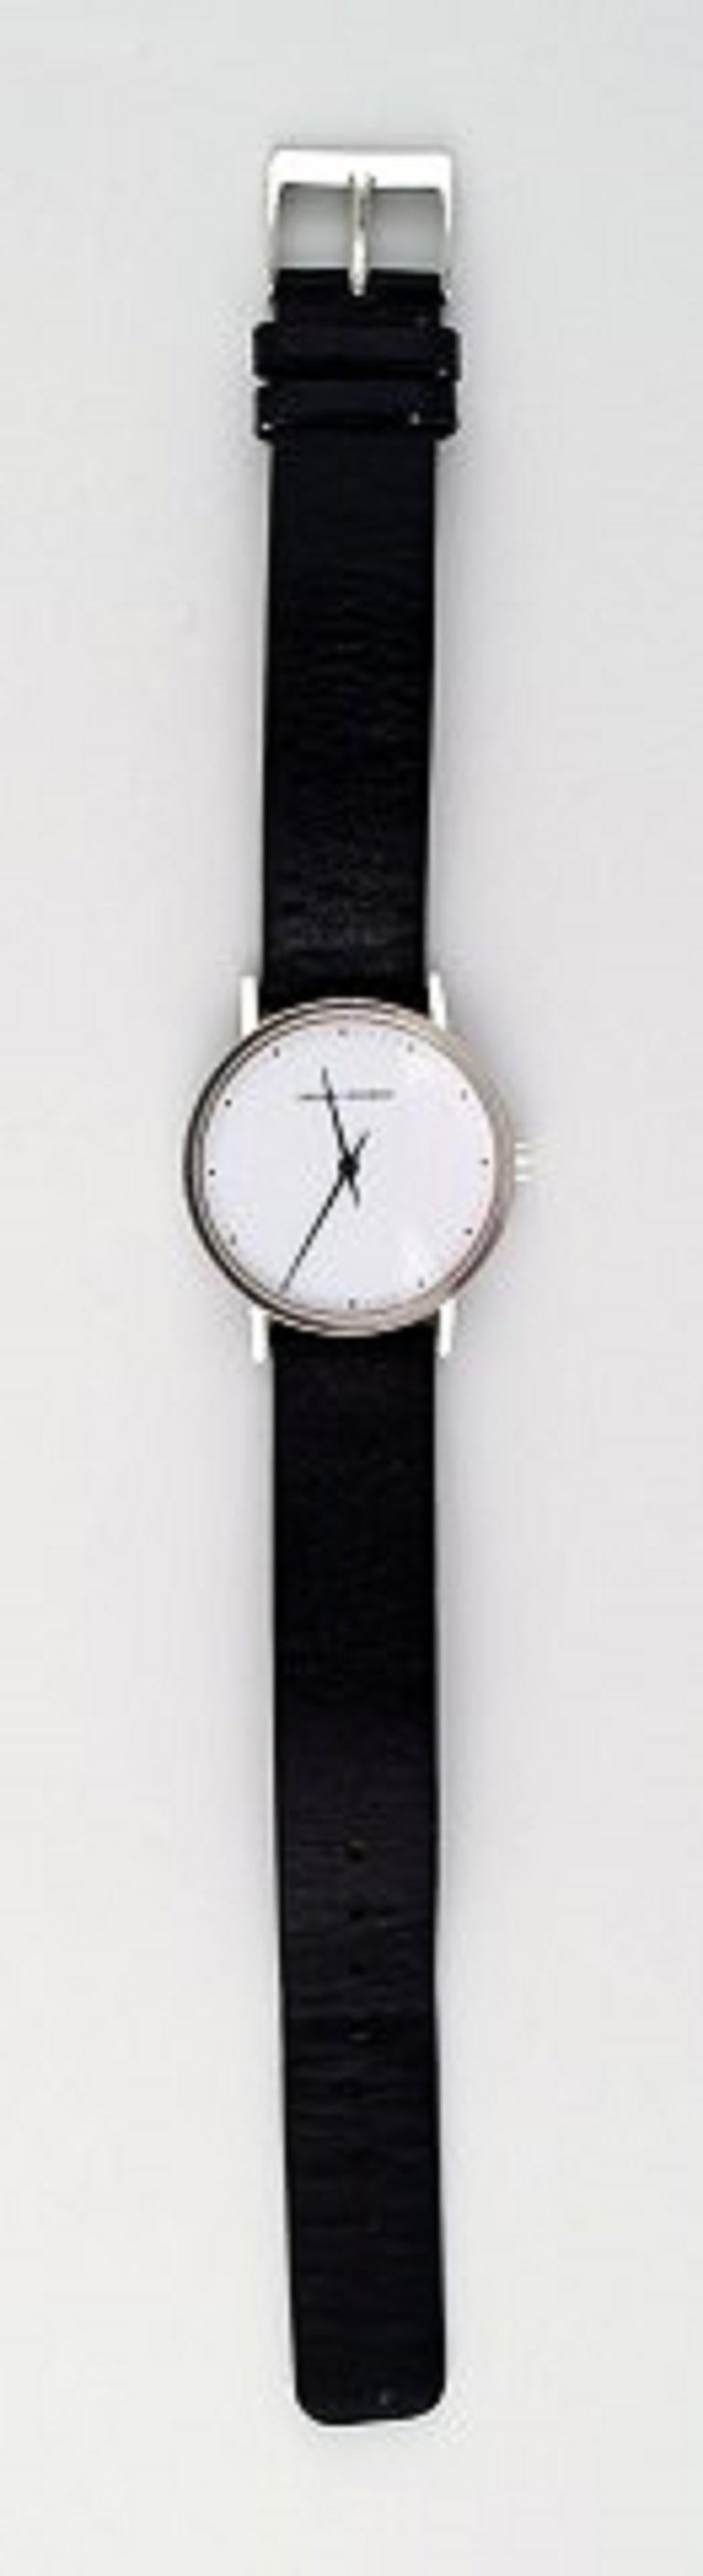 Henning Koppel:Gentleman's wristwatch of steel. Manufactured by Georg Jensen. Design no. 321. Quartz. White dial with black hands and dot hour markers.  
Case diameter 33 mm.
In perfect condition.